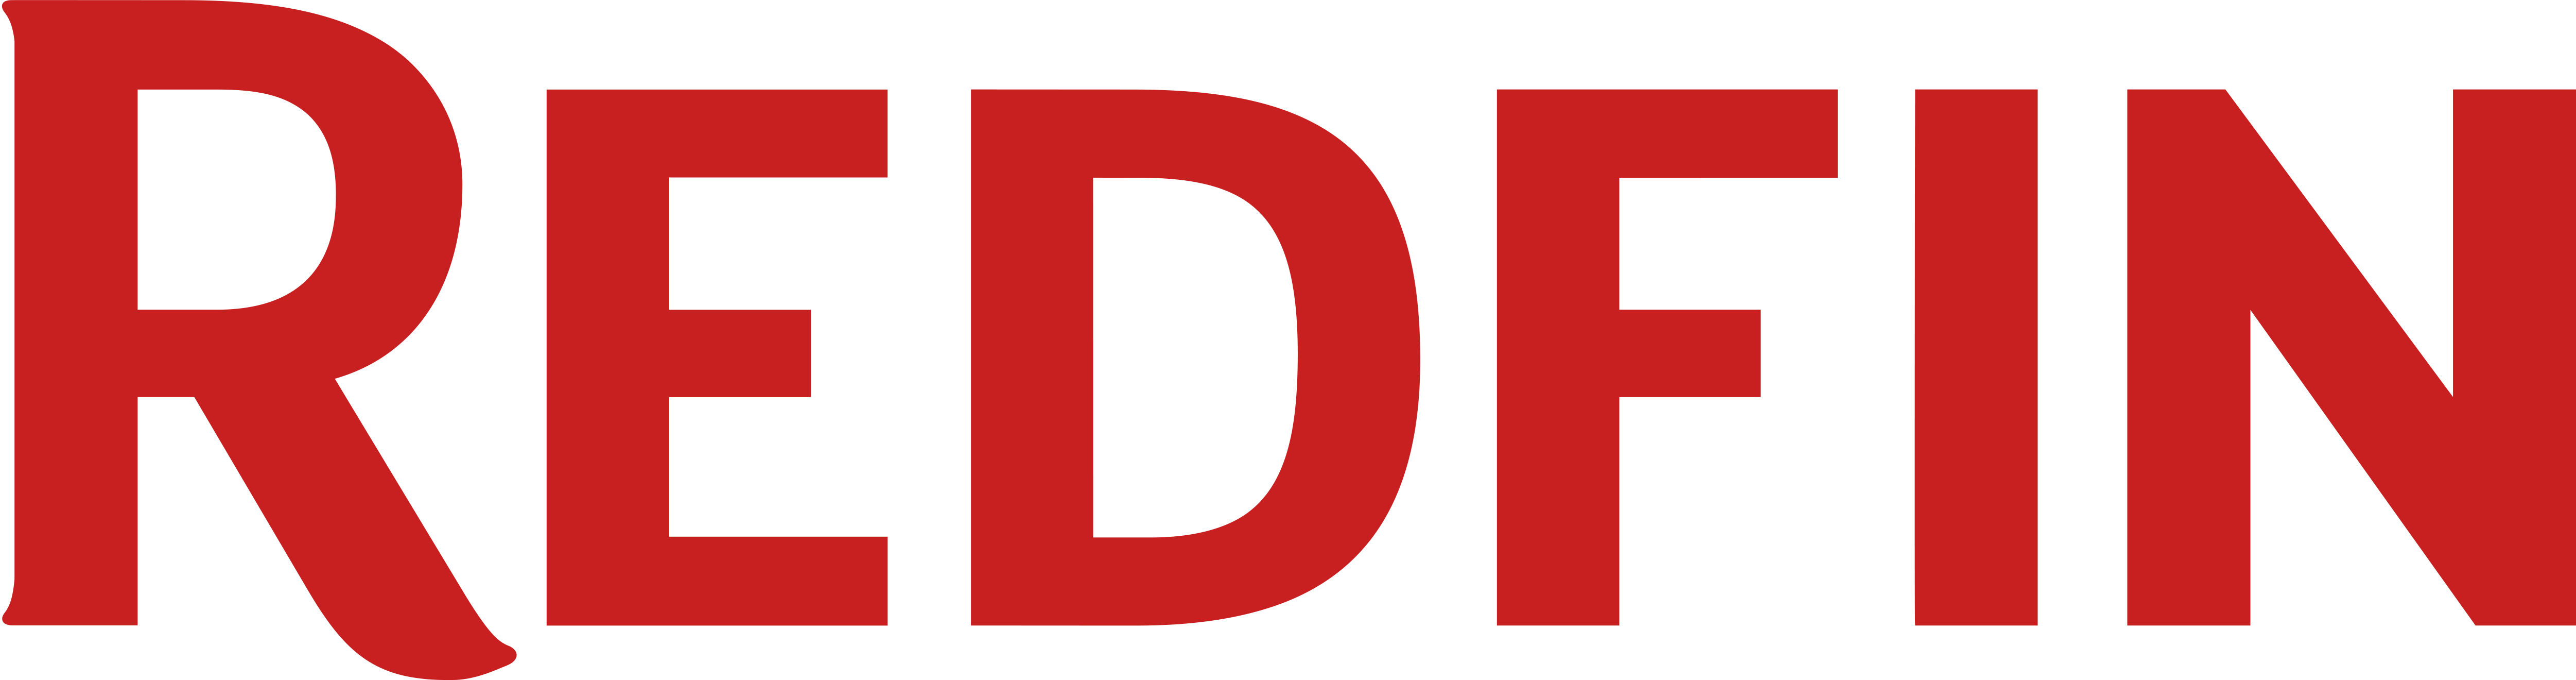 Redfin Logo EAC Network